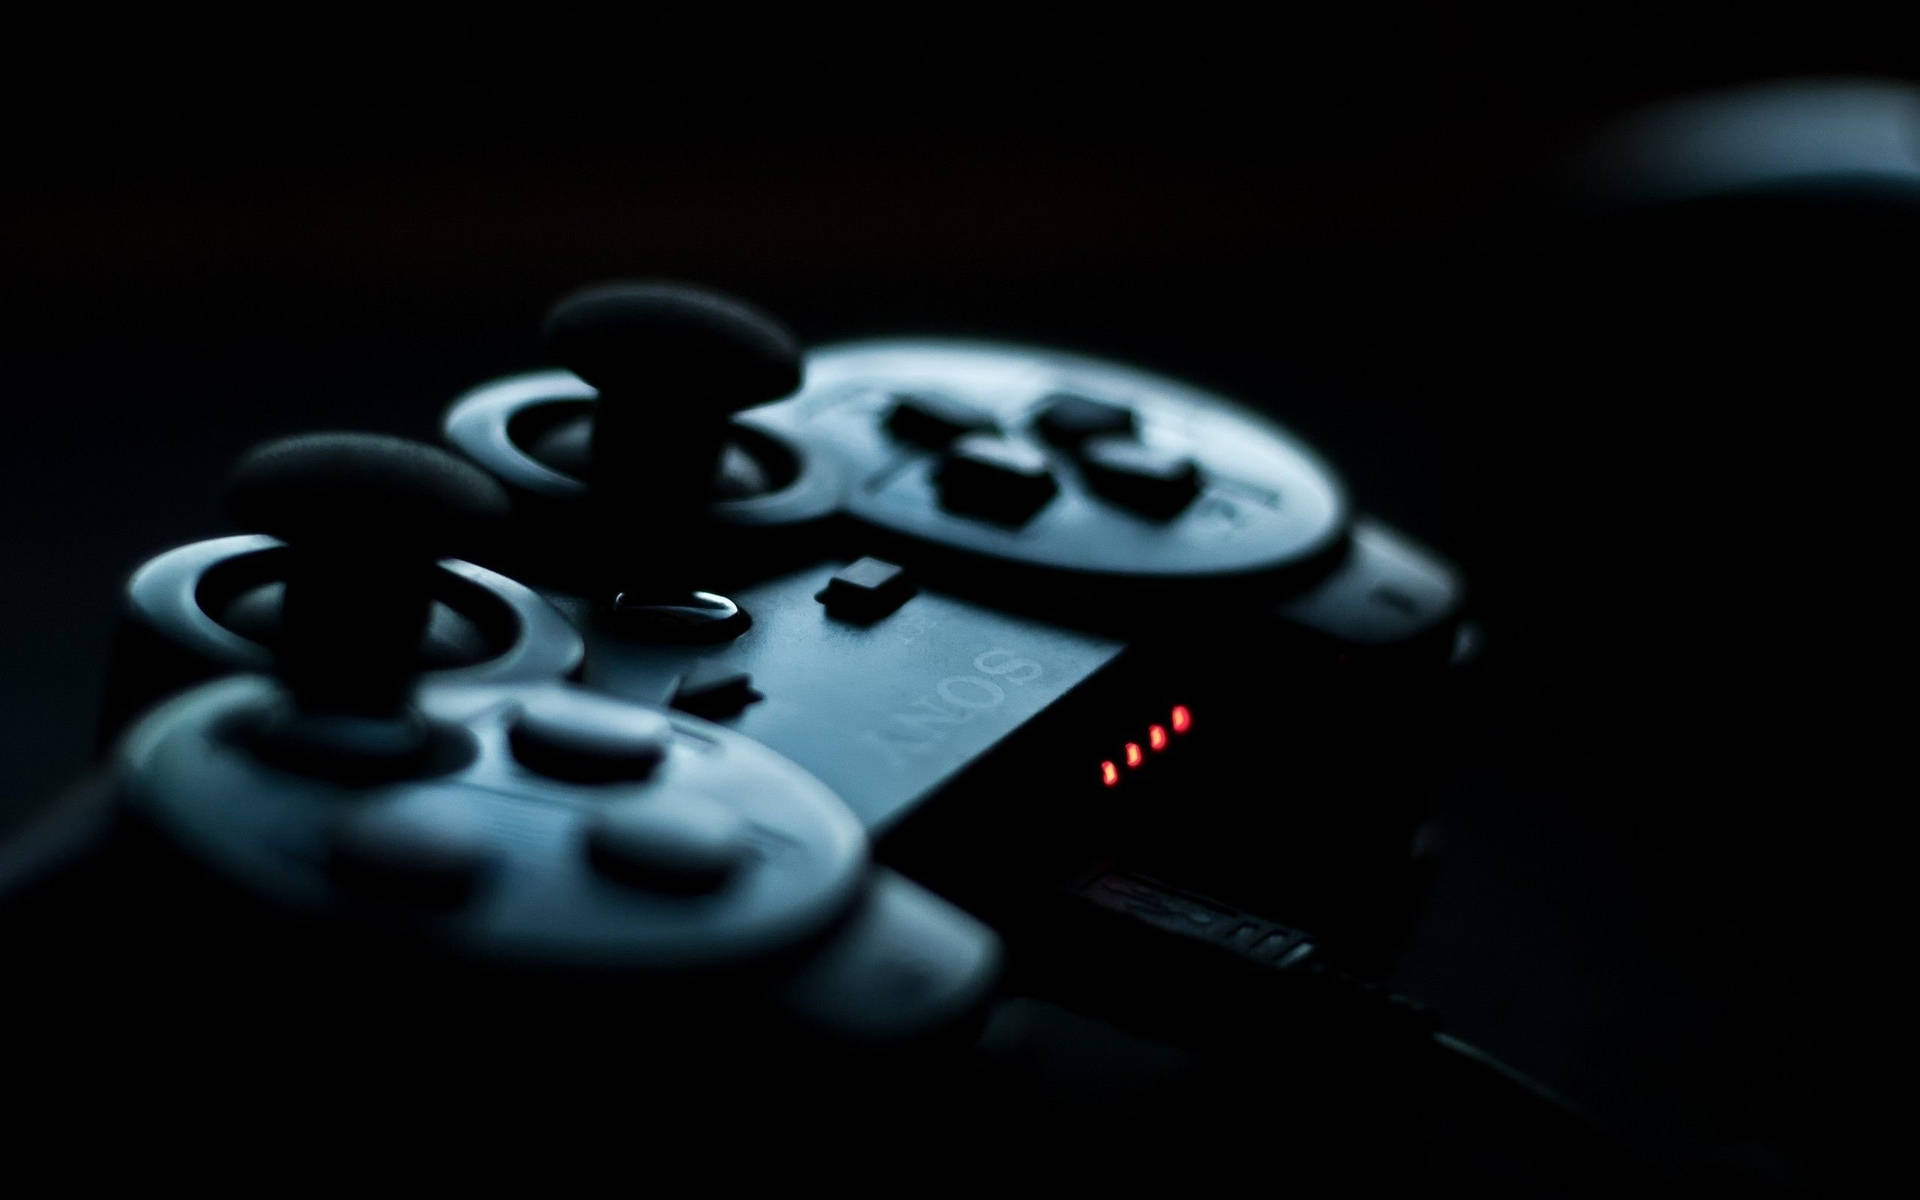 PS4 controller close-up photography wallpaper.